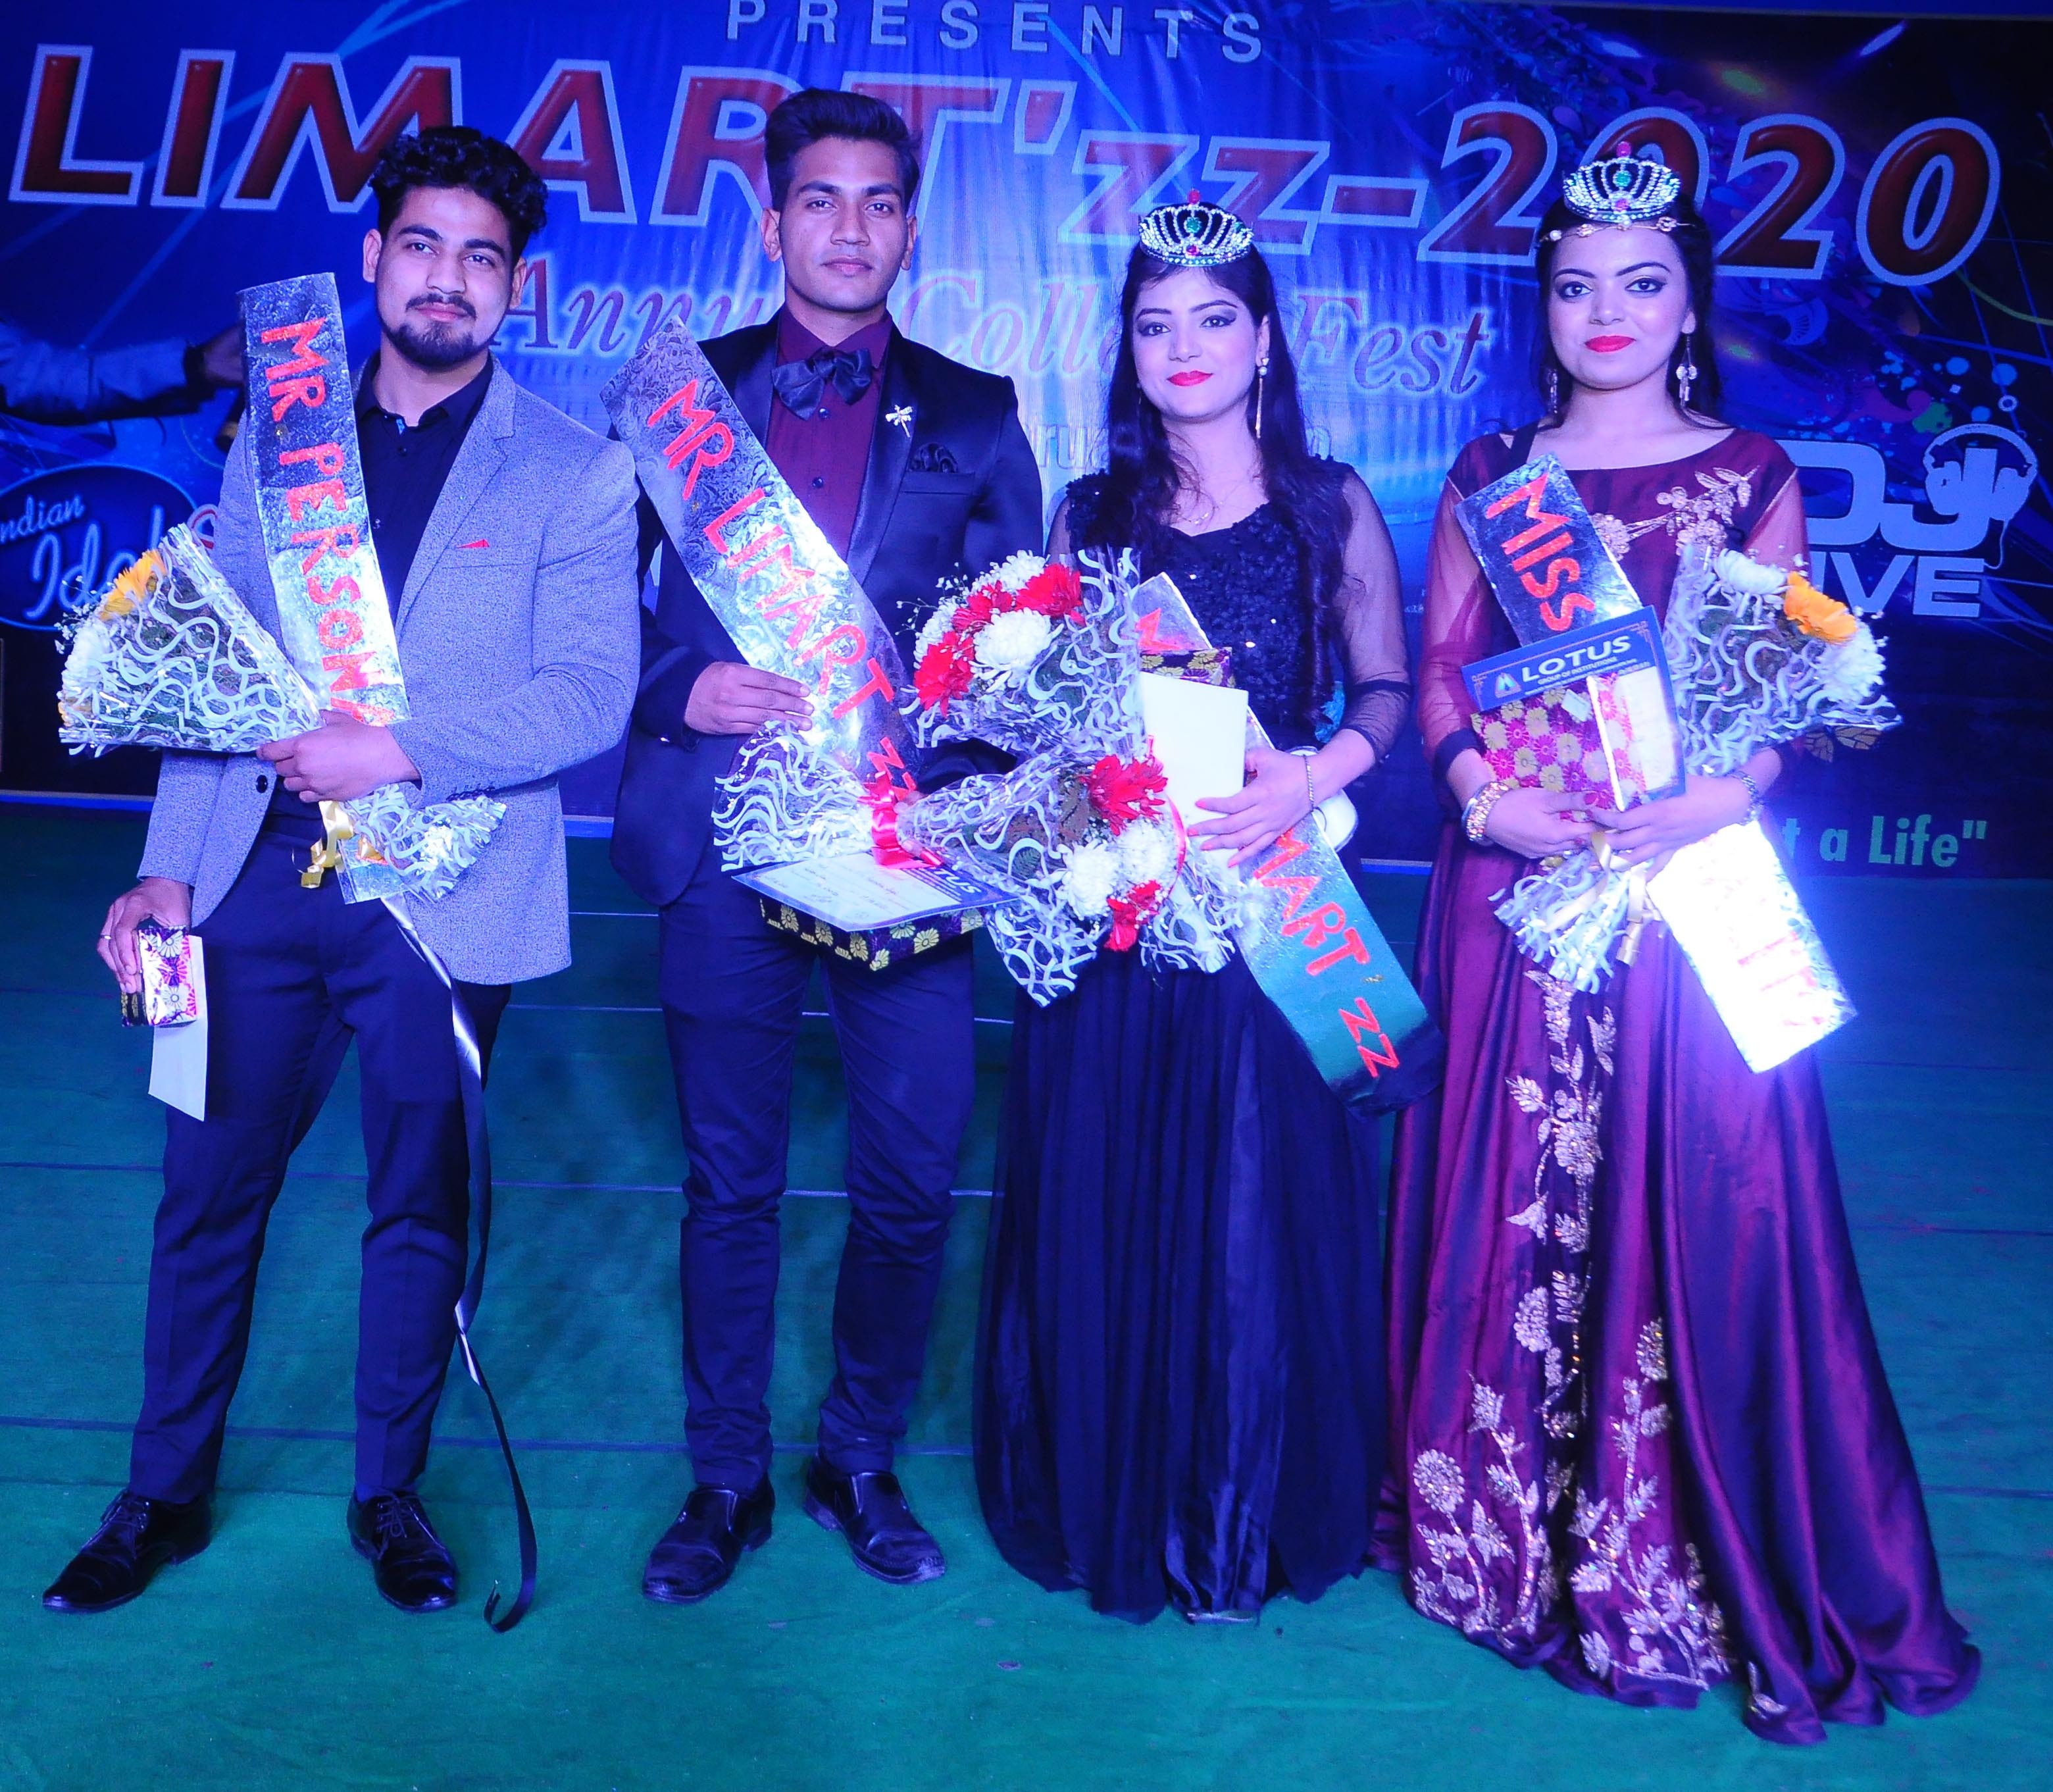 The winners of Limartzz titles